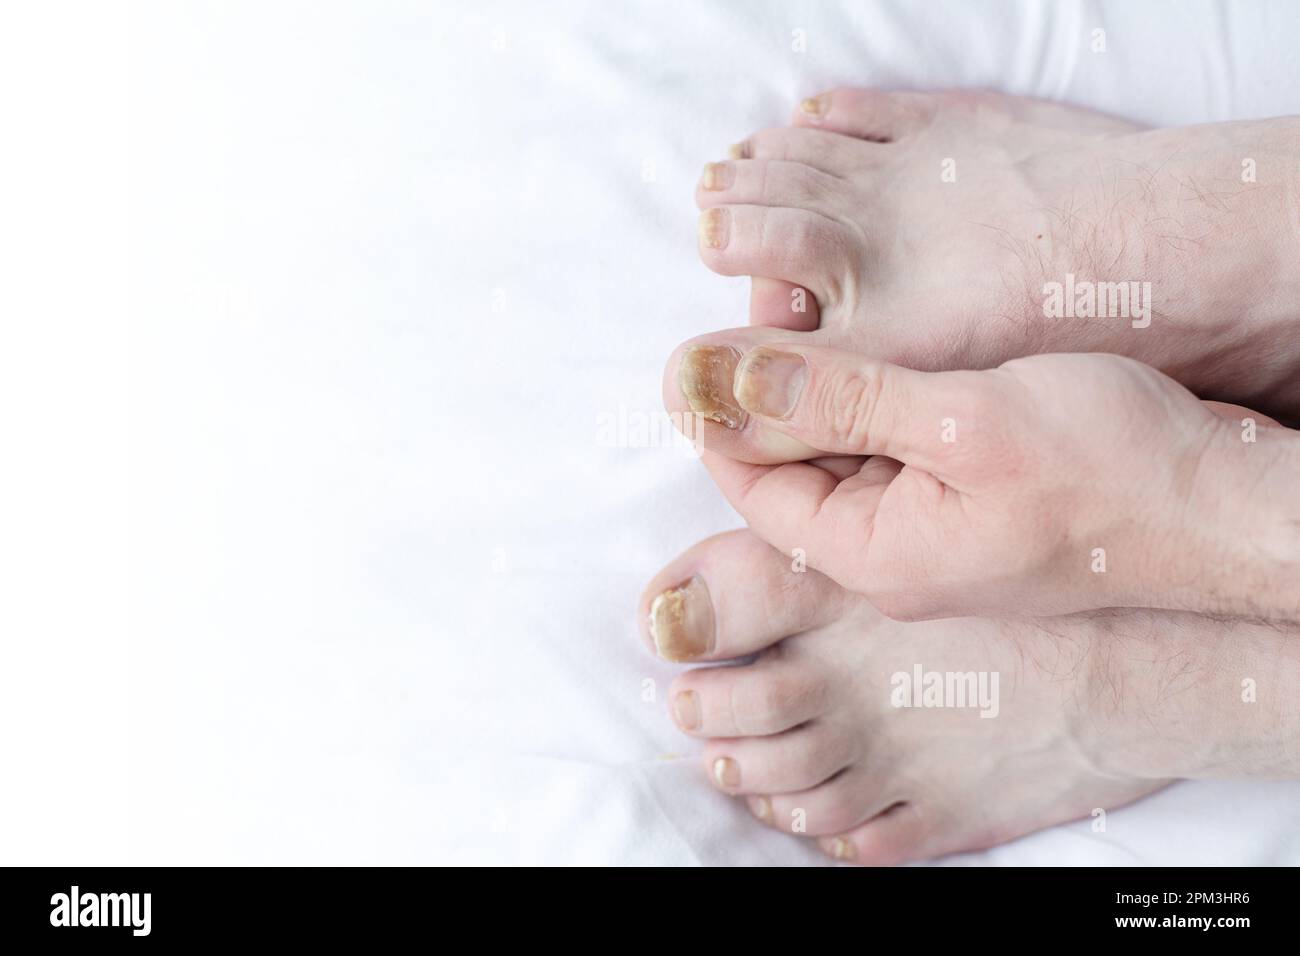 Male cut nails with nail fungus. Fungal infection on nails legs, finger with onychomycosis. Care and treatment. Closeup of a foot with damaged nails b Stock Photo